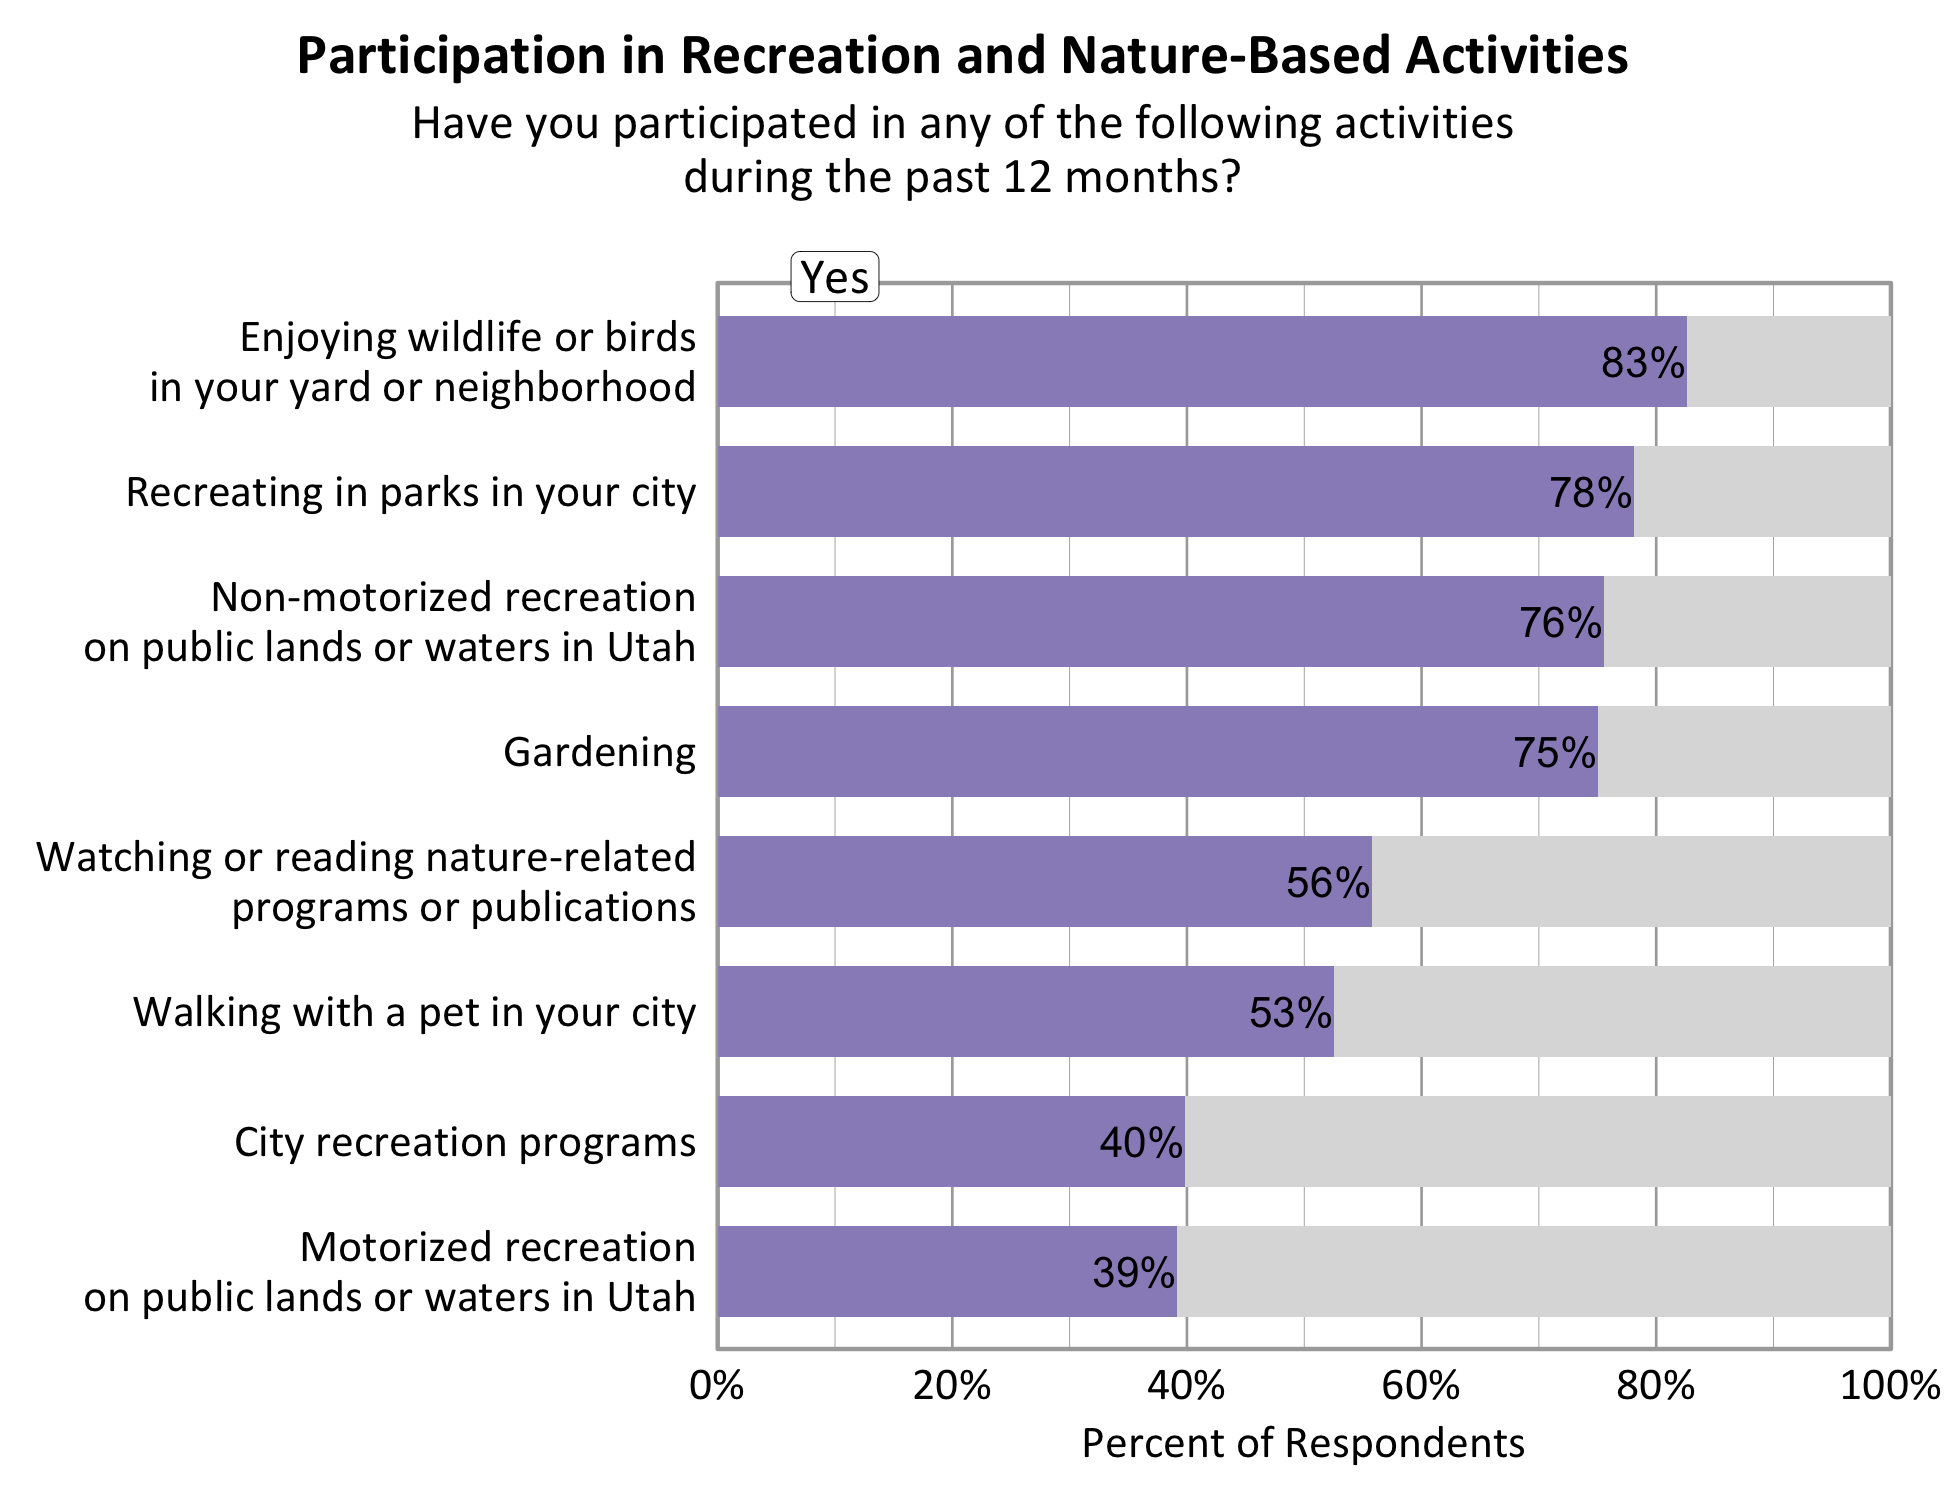 Type: Bar Graph Title: Participation in Recreation and Nature-based Activities in Utah. Subtitle: Have you participated in any of the following activities during the past 12 months? Data - 76% of respondents indicated yes to non-motorized recreation on public lands or waters in Utah. 83% of respondents indicated yes to enjoying wildlife or birds in your yard or neighborhood. 39% of respondents indicated yes to motorized recreation on public lands or waters in Utah. 78% of respondents indicated yes to recreating in parks in your city. 75% of respondents indicated yes to gardening. 40% of respondents indicated yes to city recreation programs. 56% of respondents indicated yes to watching or reading nature-related programs or publications. 53% of respondents indicated yes to walking with a pet in your city.